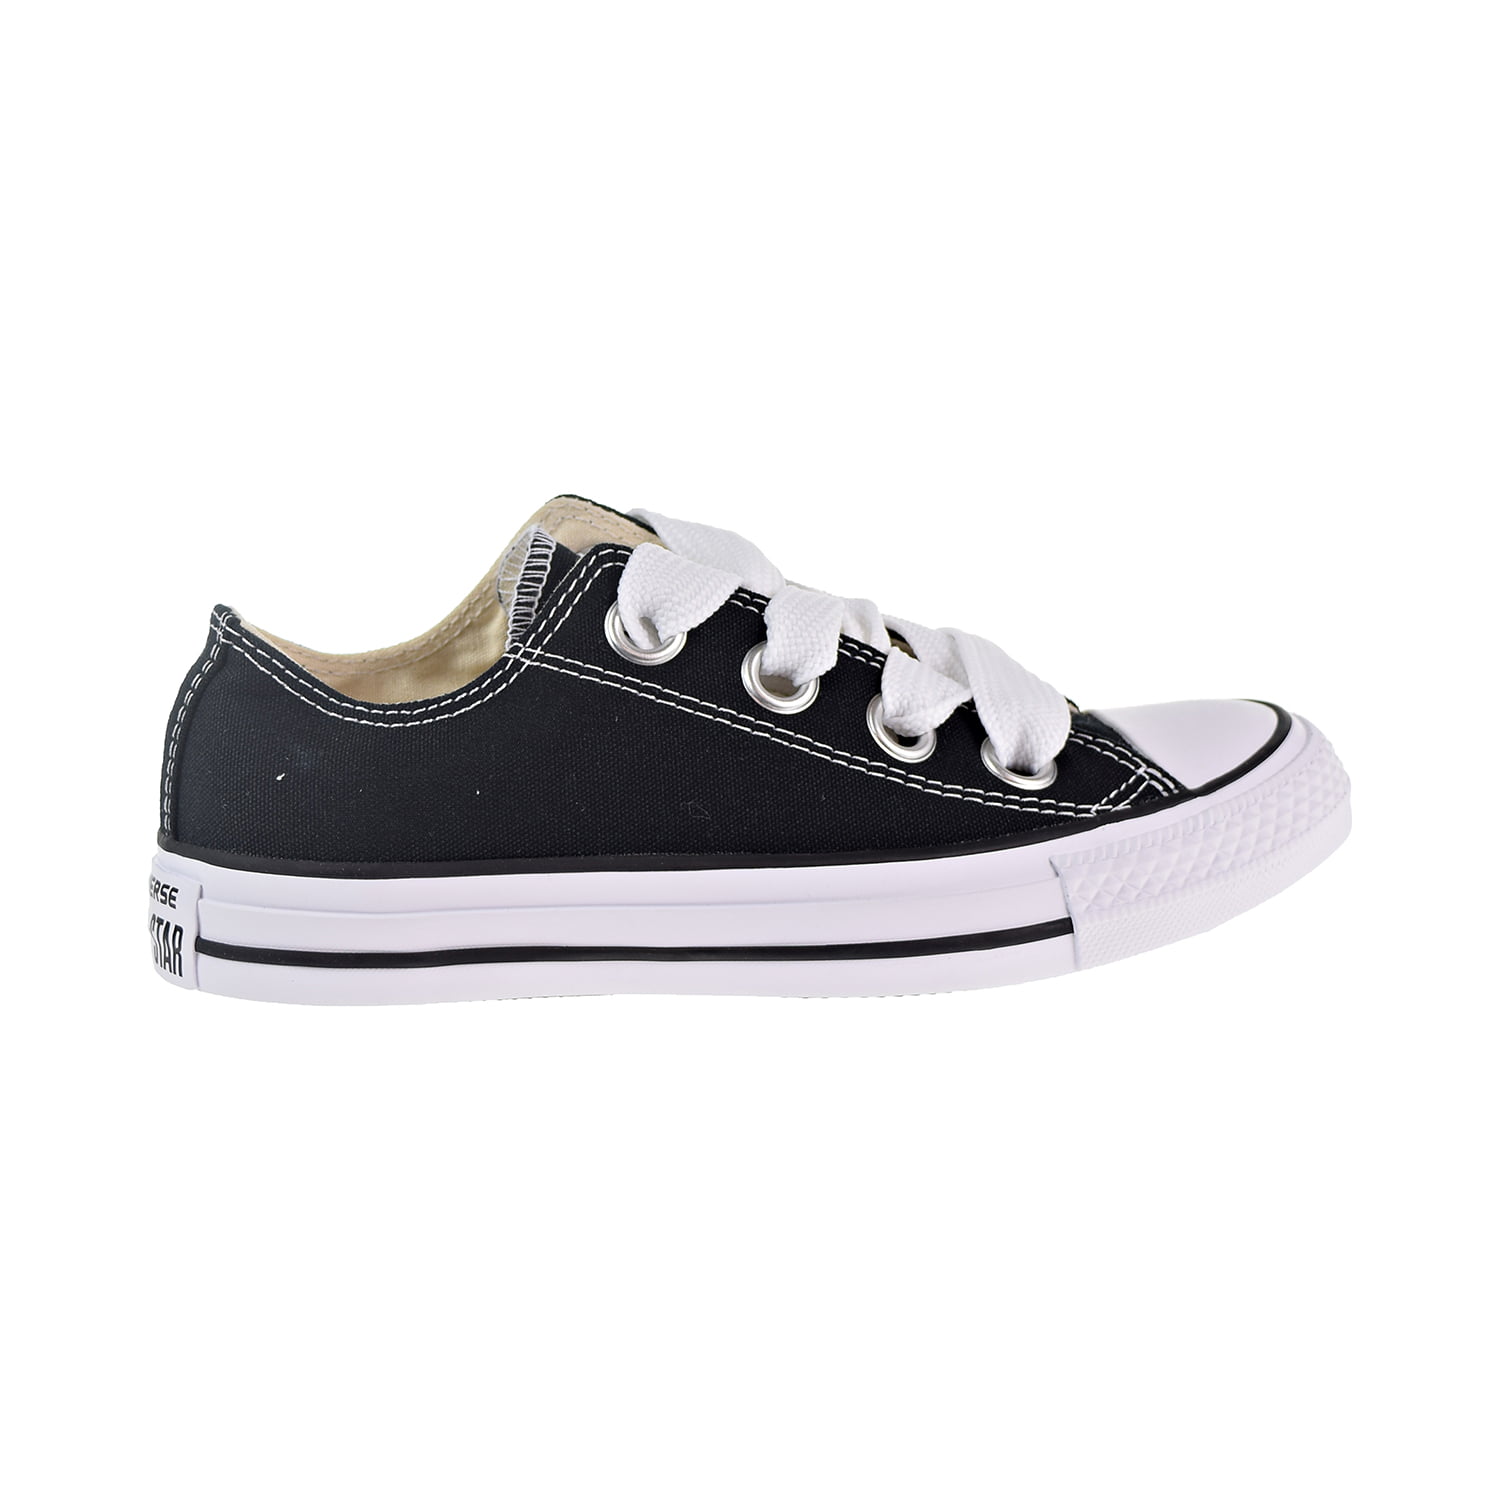 Converse Chuck Taylor All Star Big Eyelets Ox Women's Shoes Black-Natural-White  559936c 